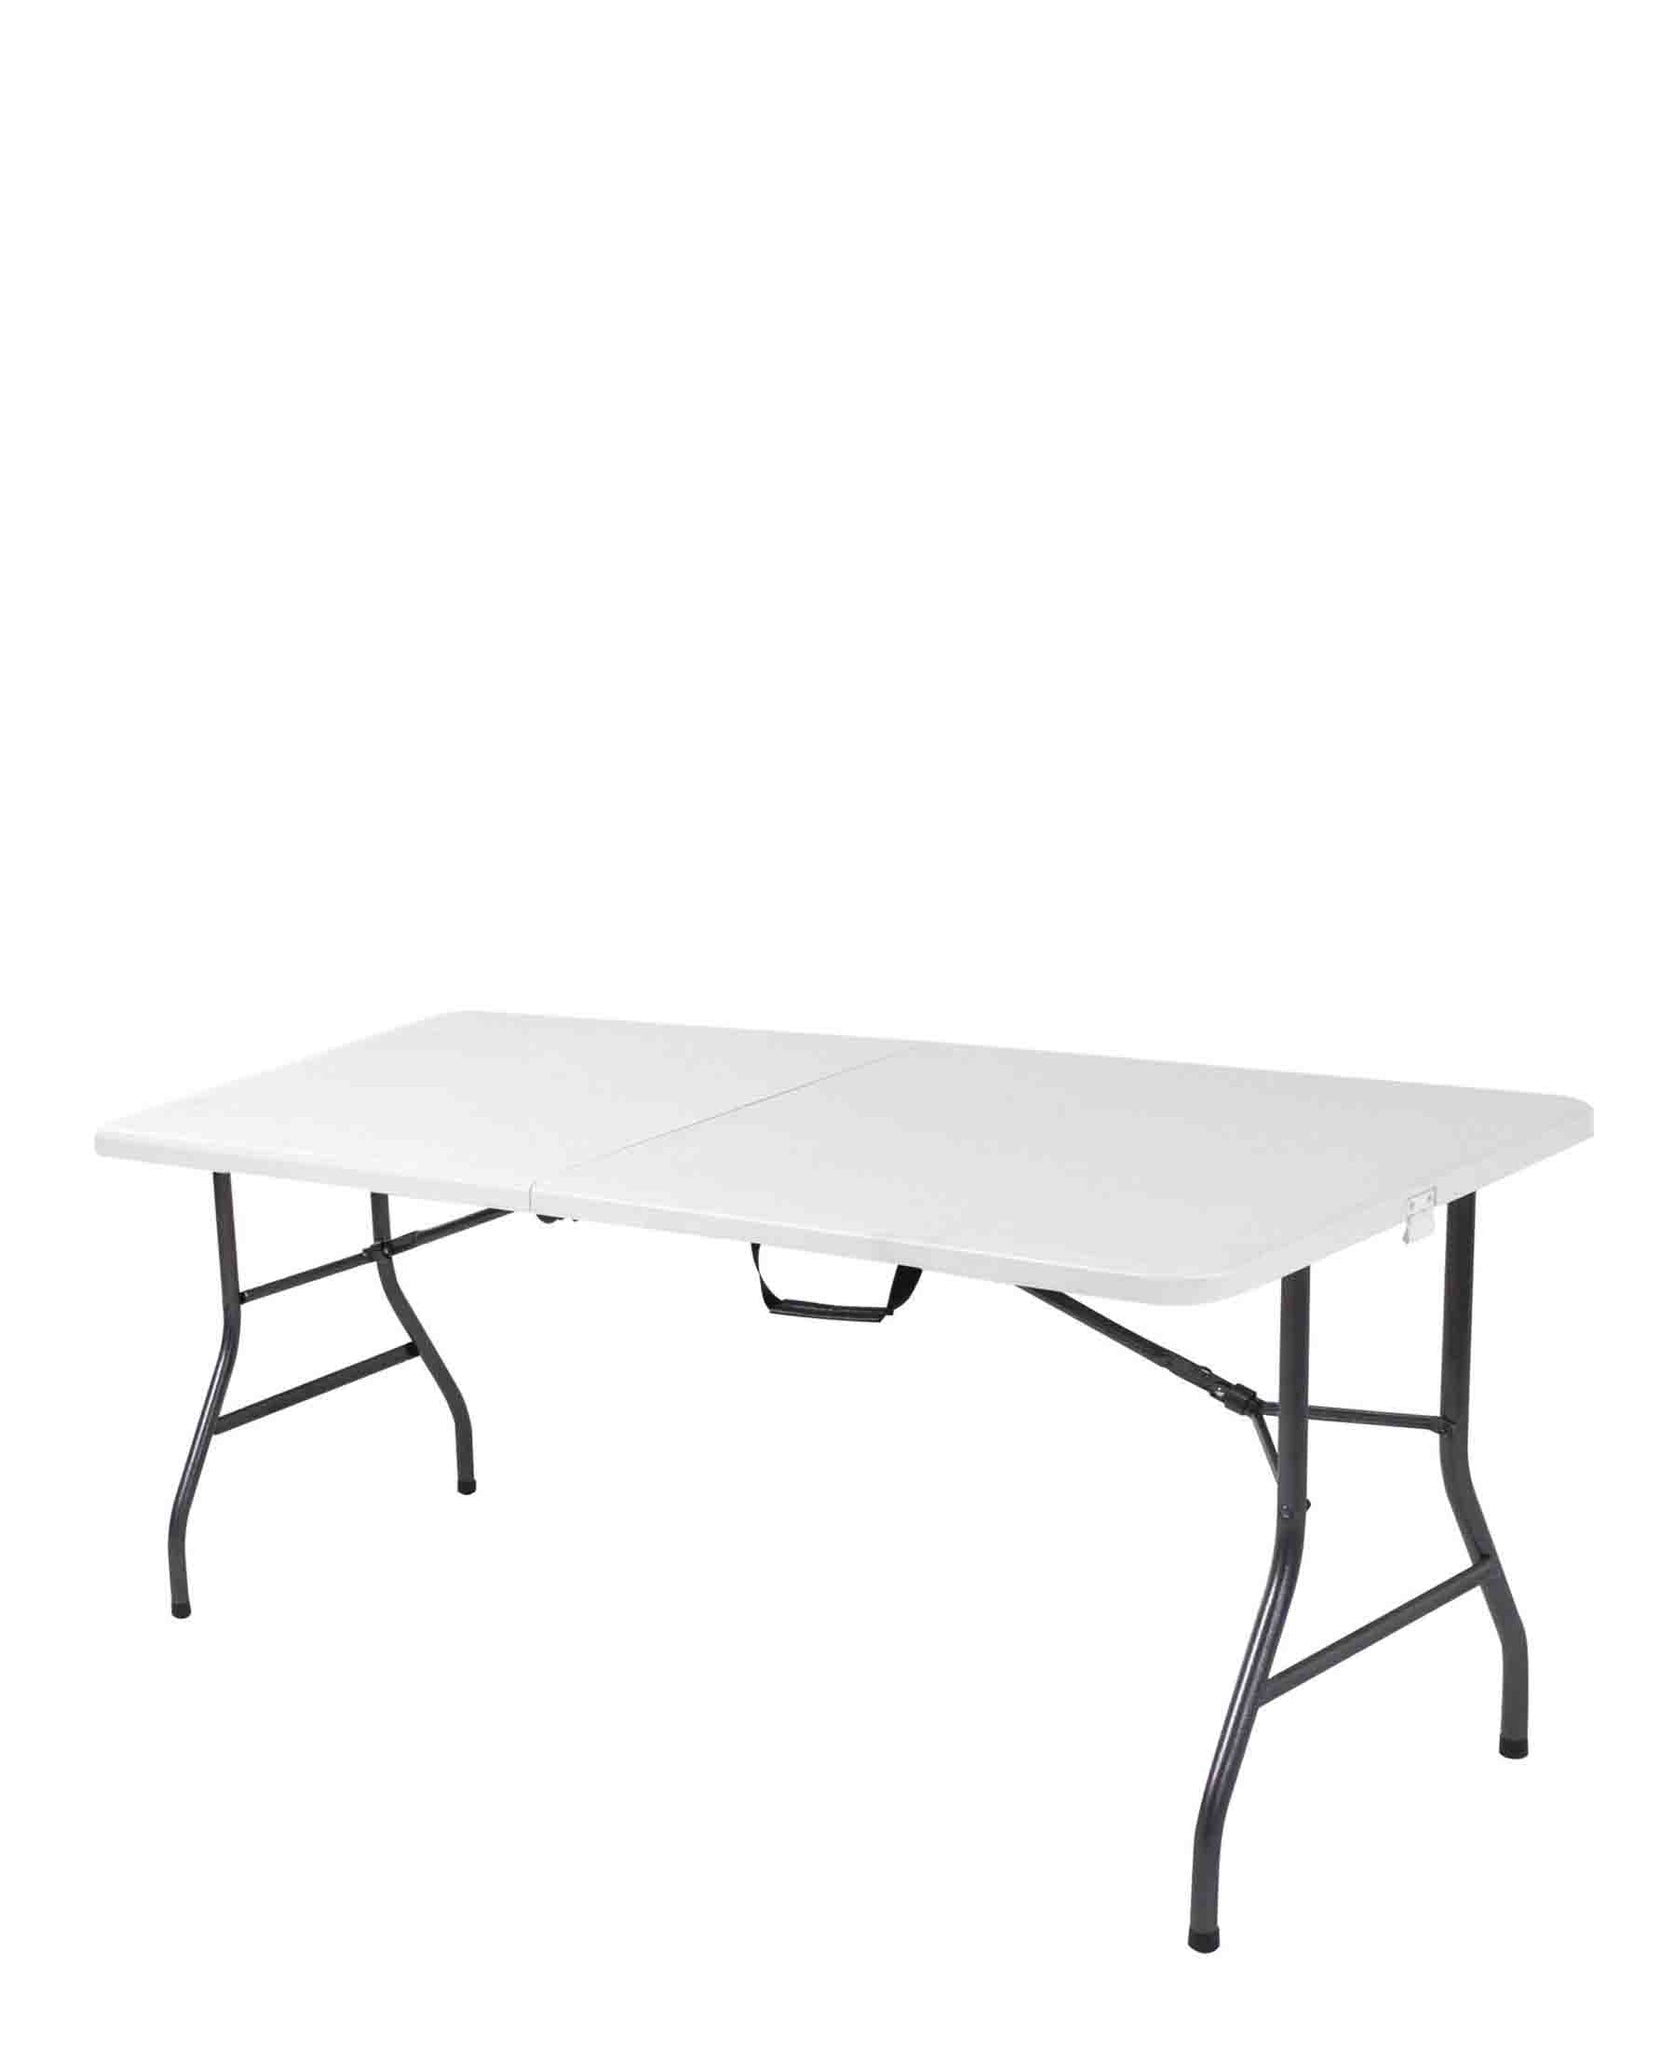 Exotic Designs Folding Table - White